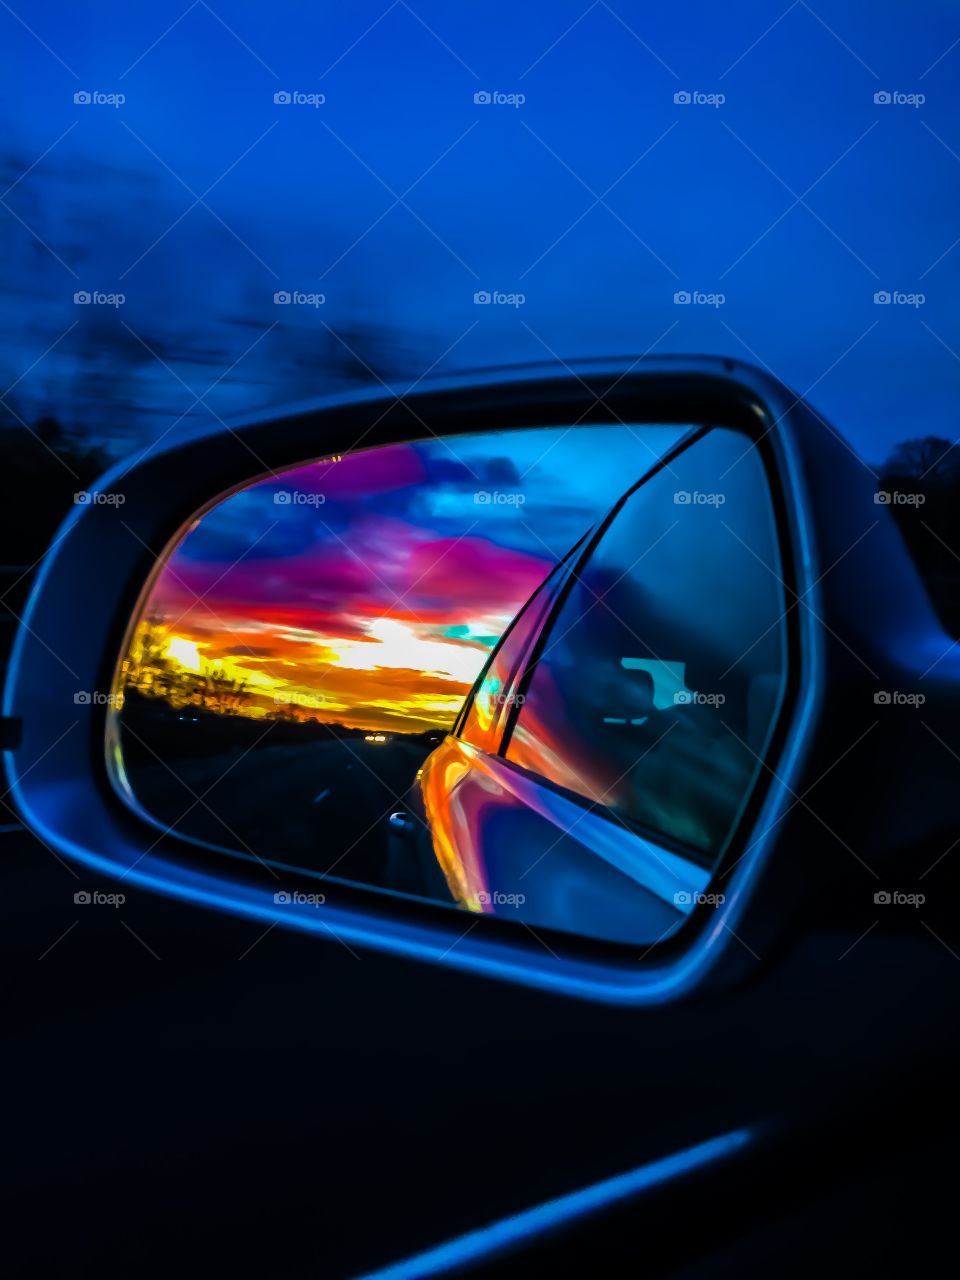 A stunning edit of the reflection in the wing mirror of the sky in the evening on a winter’s day. This image is highly popular but needs a buyer!